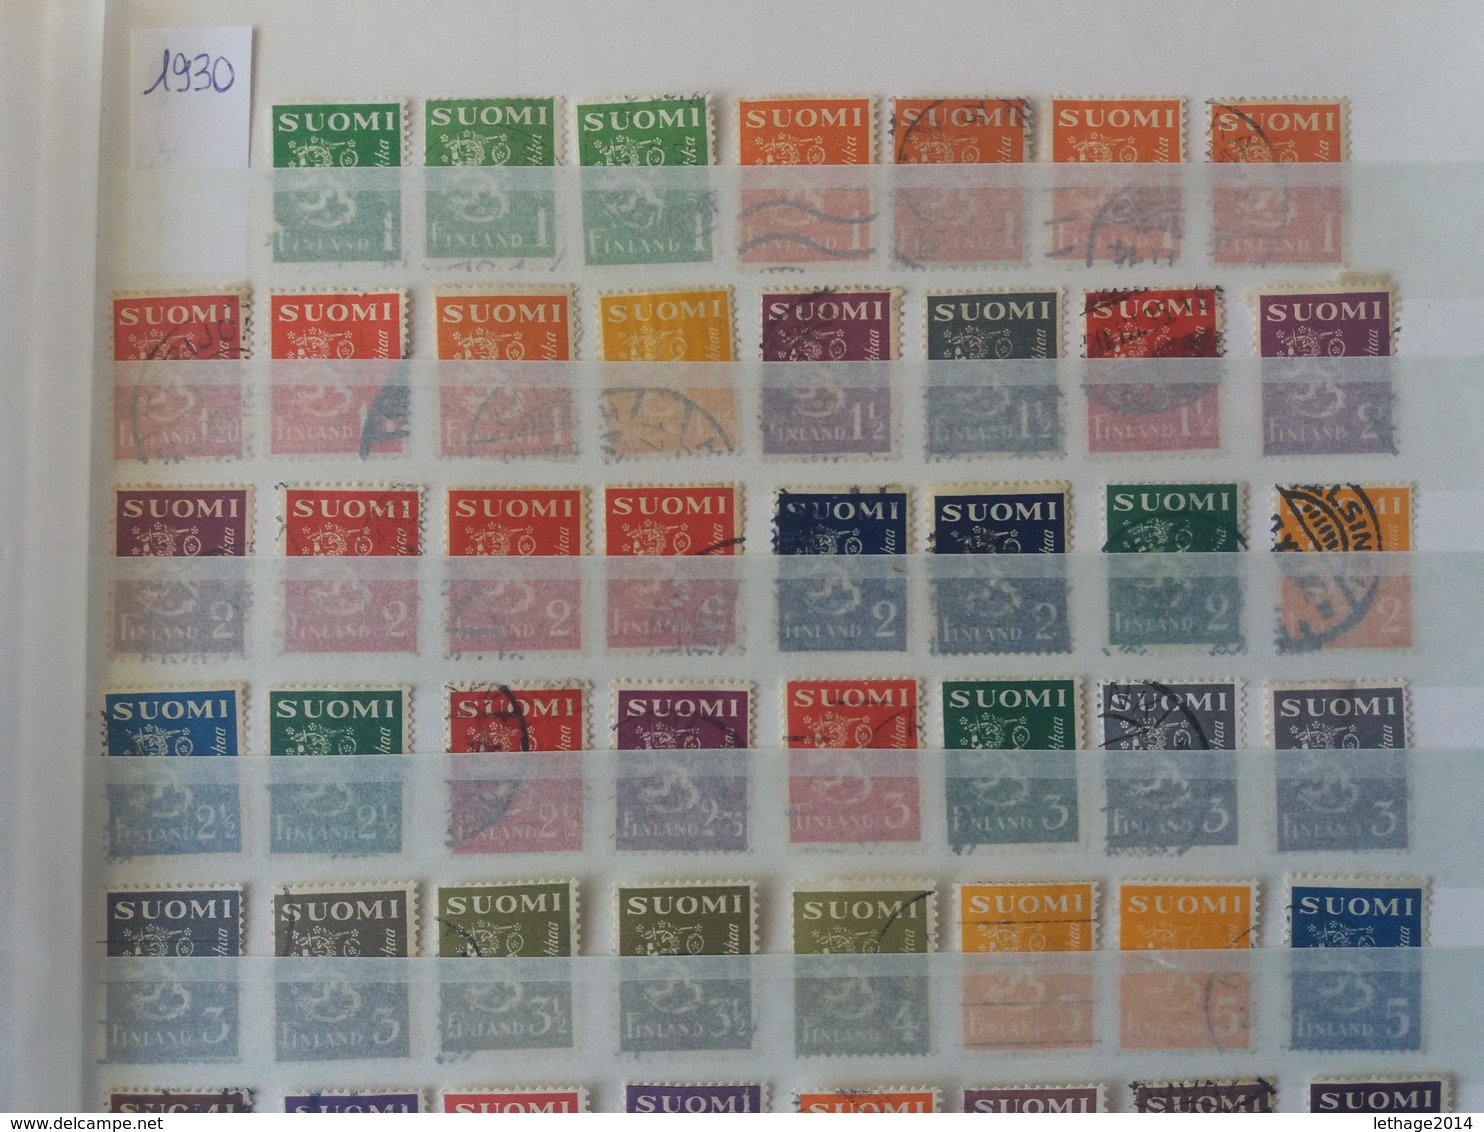 STAMPS SUOMI FINLAND Финляндия FINLANDIA FROM 1875 TO 1995 BIG STOCK 16 PHOTO